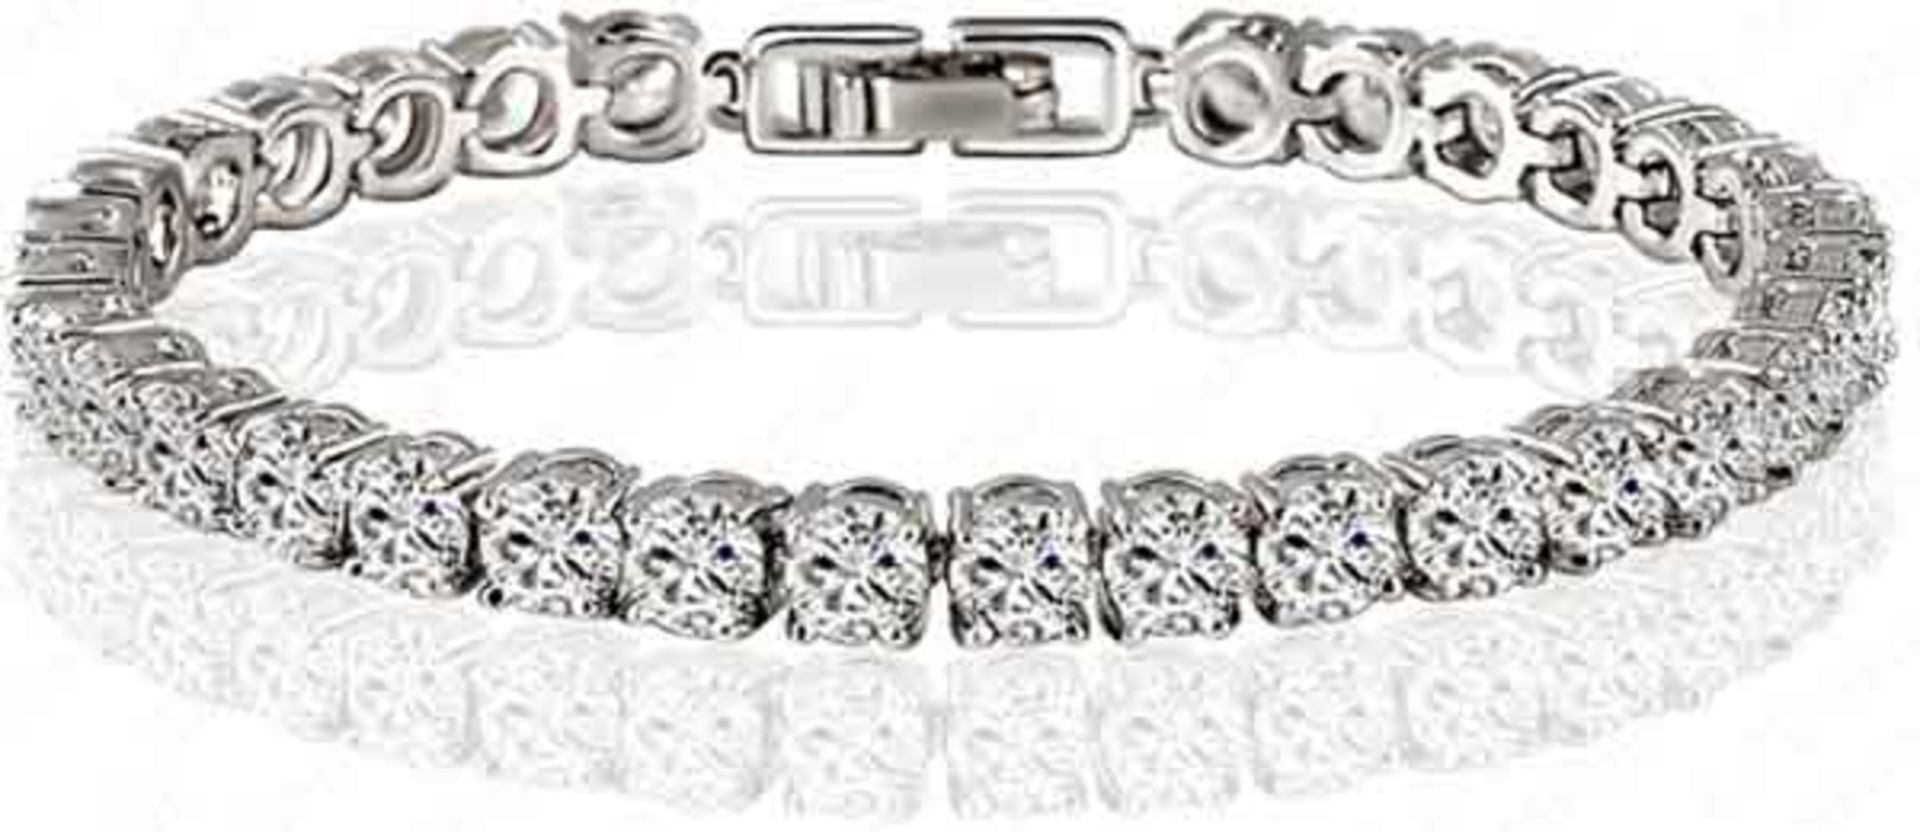 V Brand New Platinum Plated Tennis Bracelet with White Stones X 2 YOUR BID PRICE TO BE MULTIPLIED BY